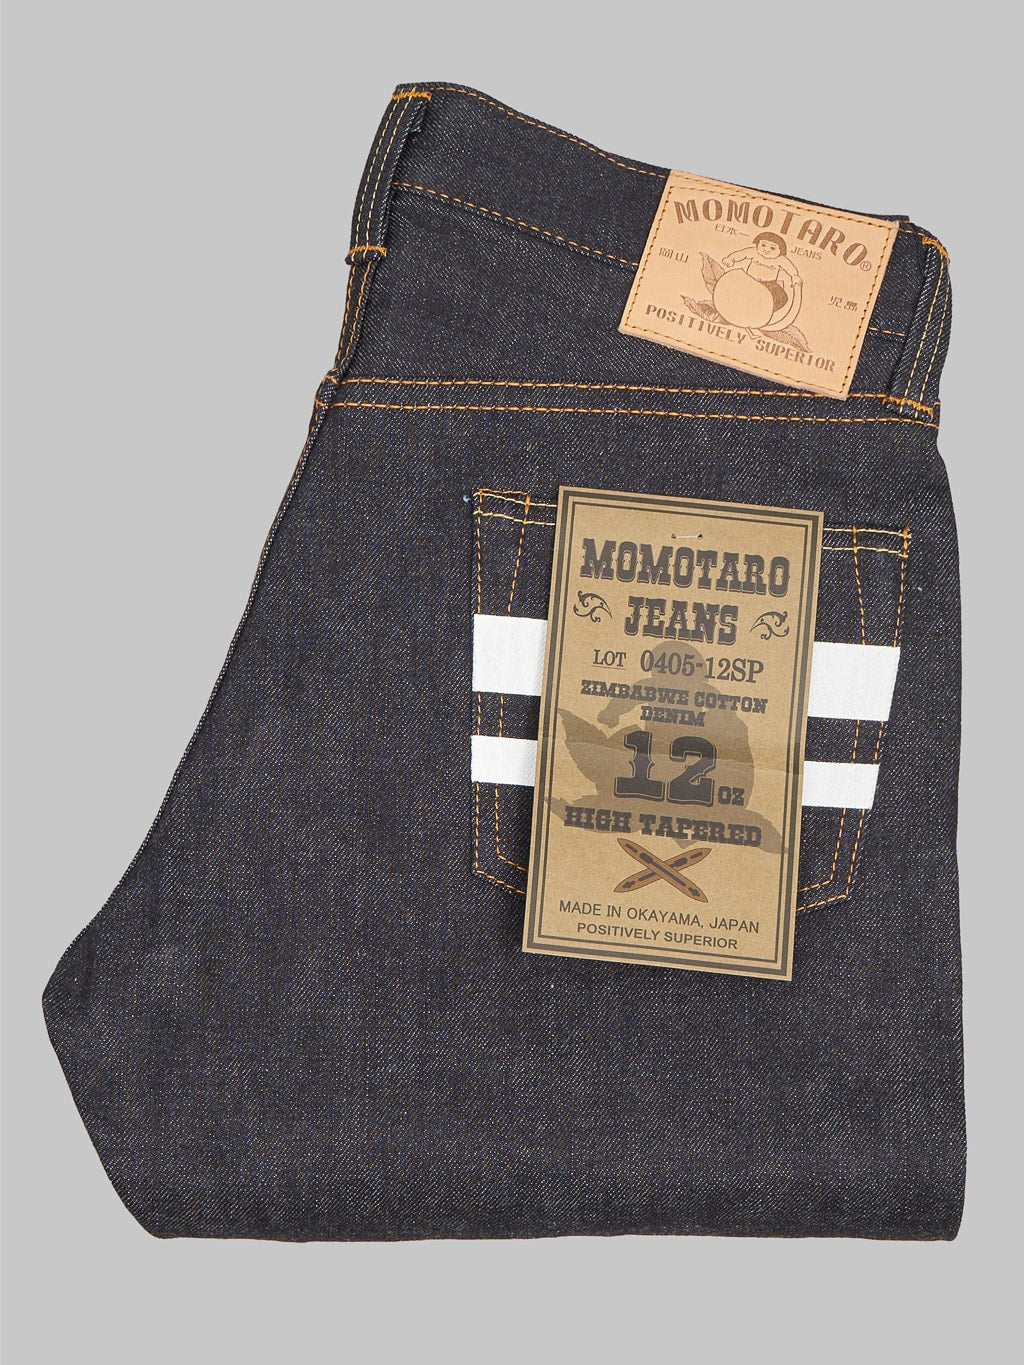 Momotaro 0405 12 going to batle 12oz high Tapered Jeans japanese made